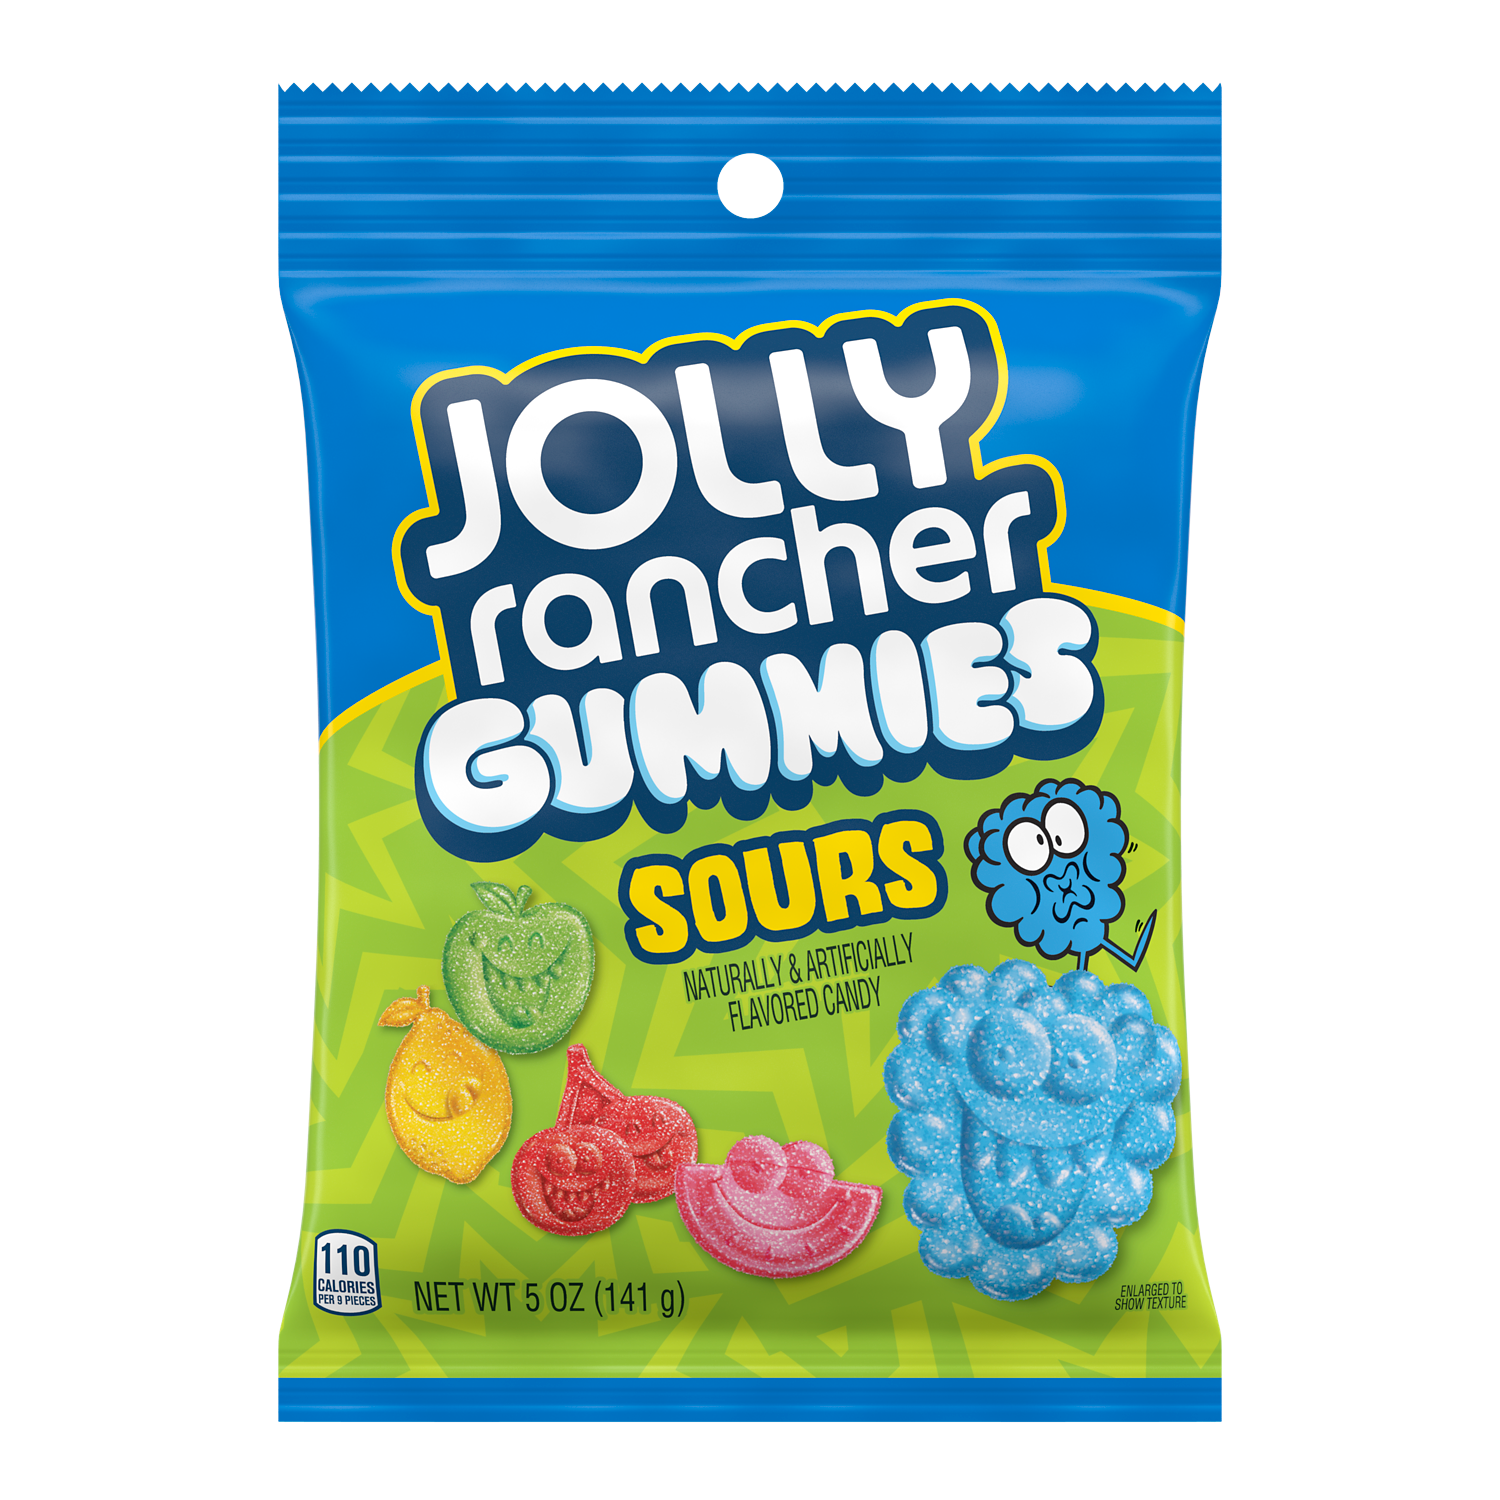 JOLLY RANCHER Gummies Sours, 5 oz bag - Front of Package